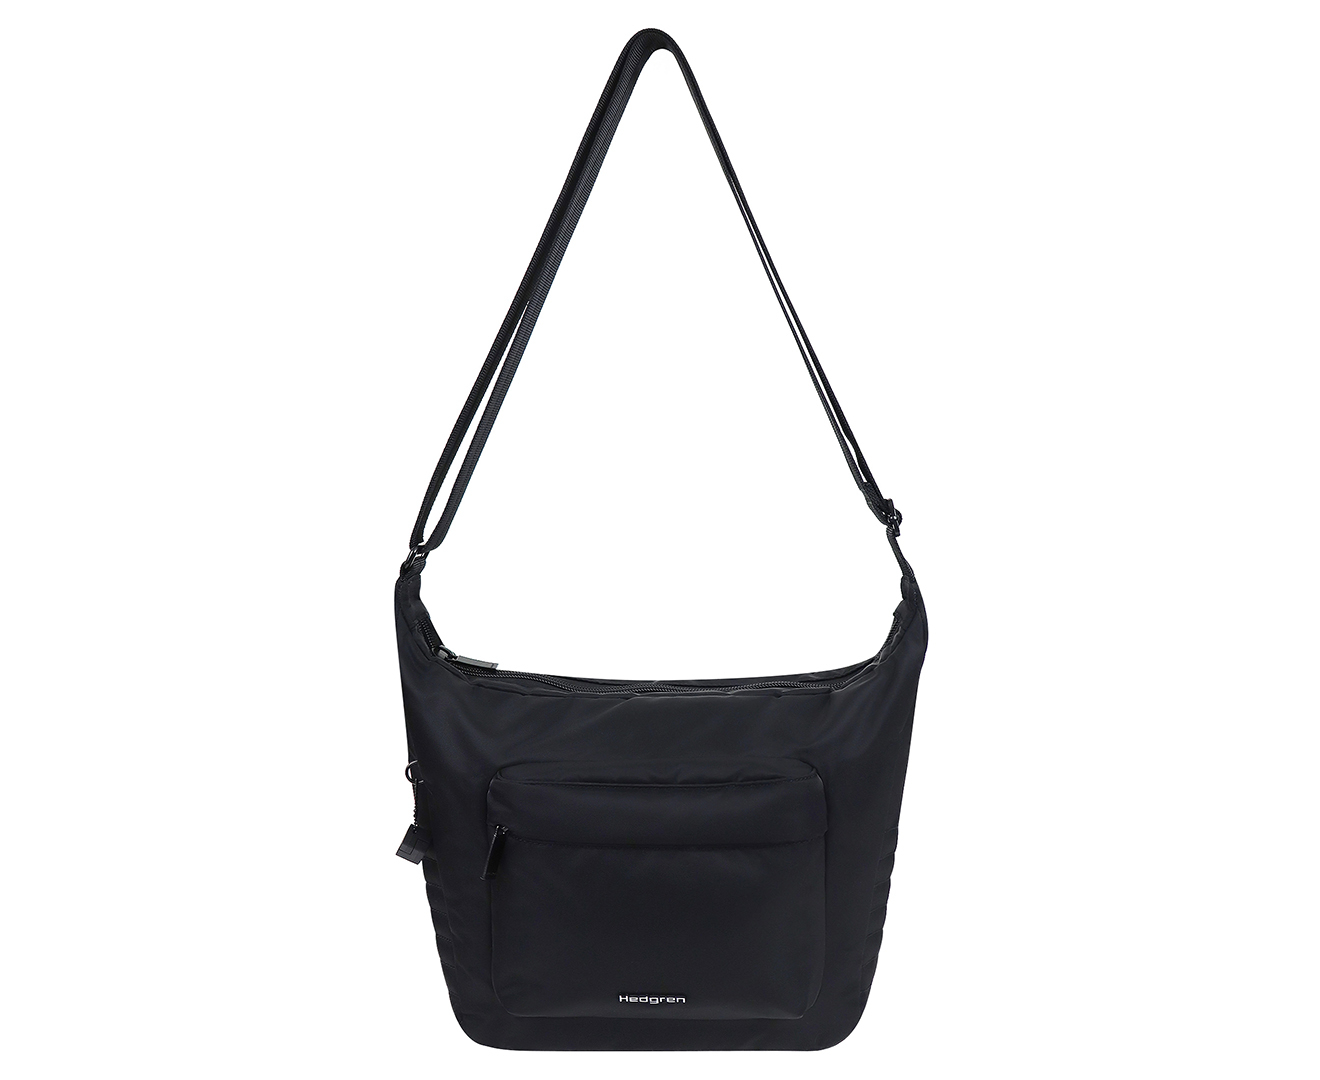 Hedgren Ashby Sustainable Crossbody Bag - Black | Catch.co.nz